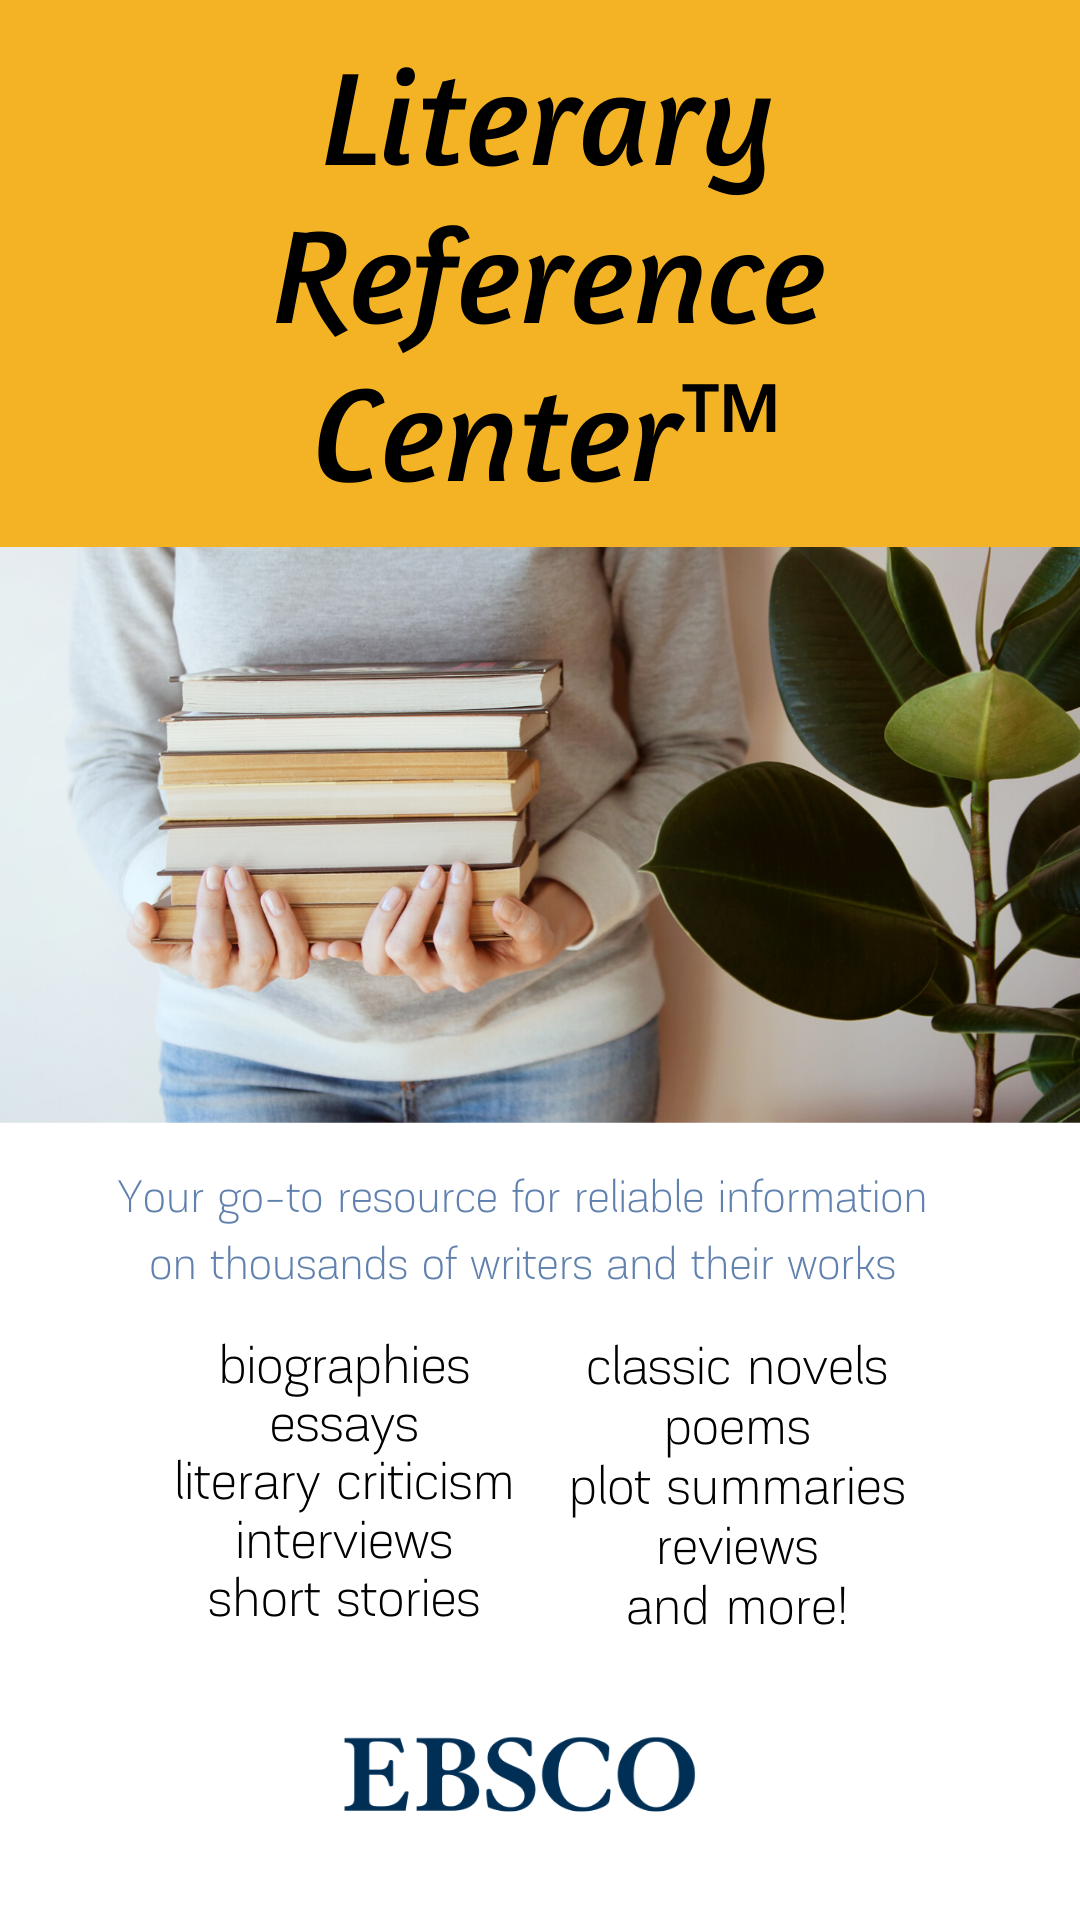 A graphic advertising the Literary Reference Center for Instagram Stories